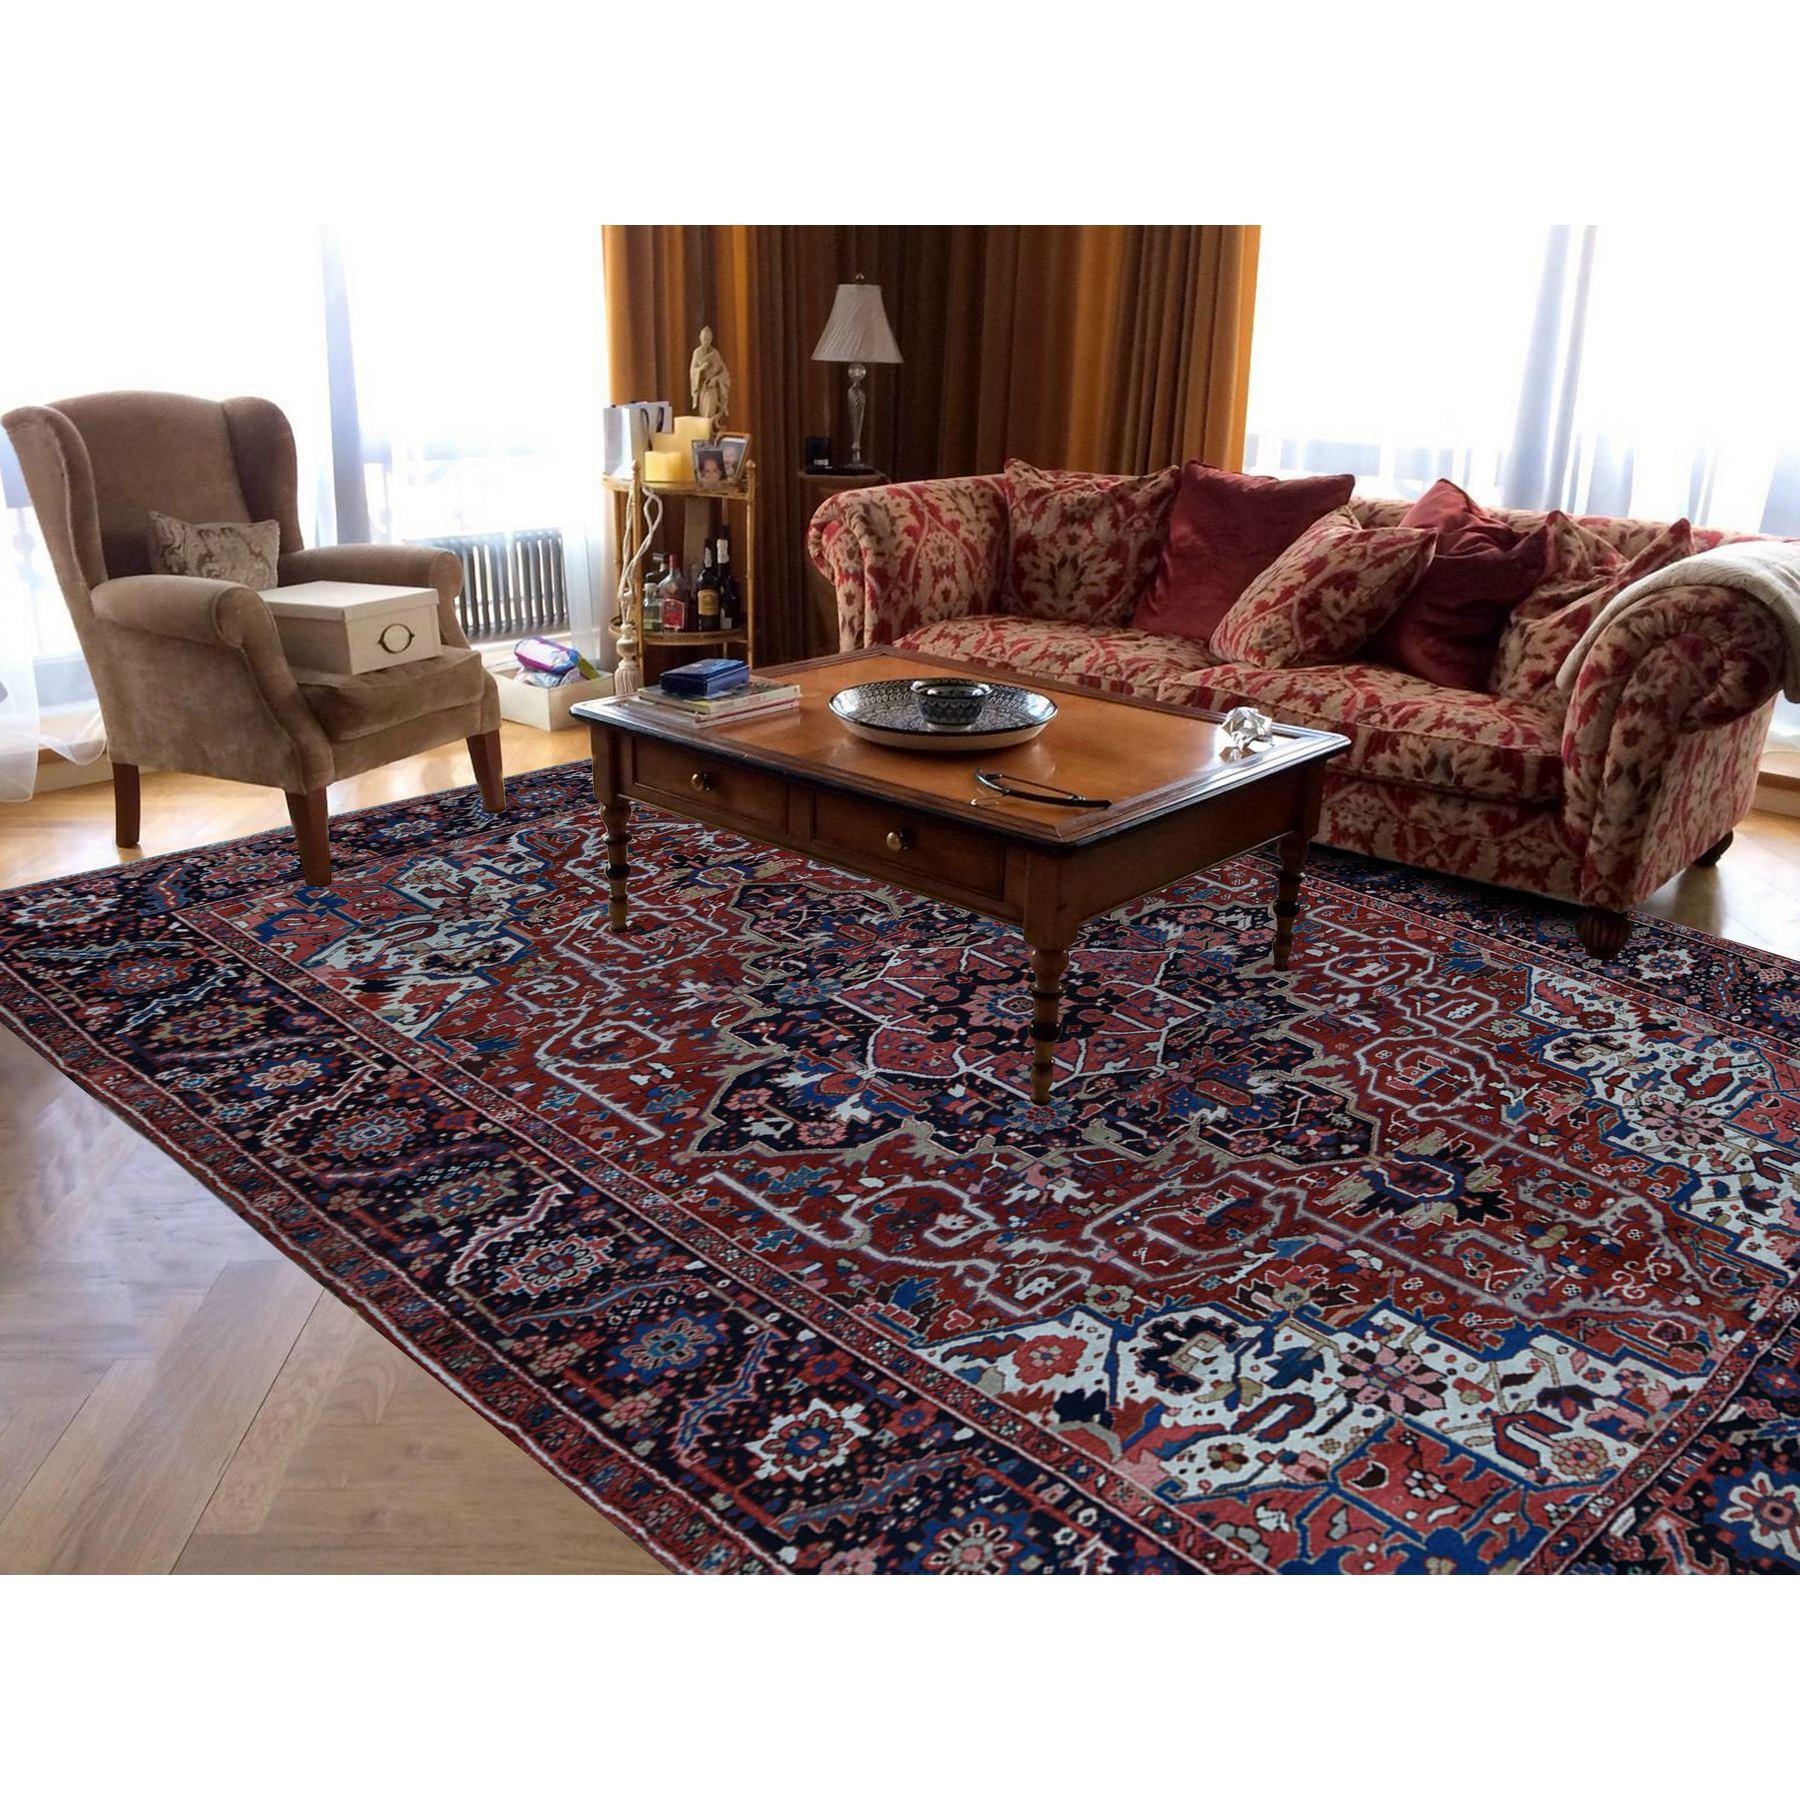 This fabulous Hand-Knotted carpet has been created and designed for extra strength and durability. This rug has been handcrafted for weeks in the traditional method that is used to make
Exact Rug Size in Feet and Inches : 9'8